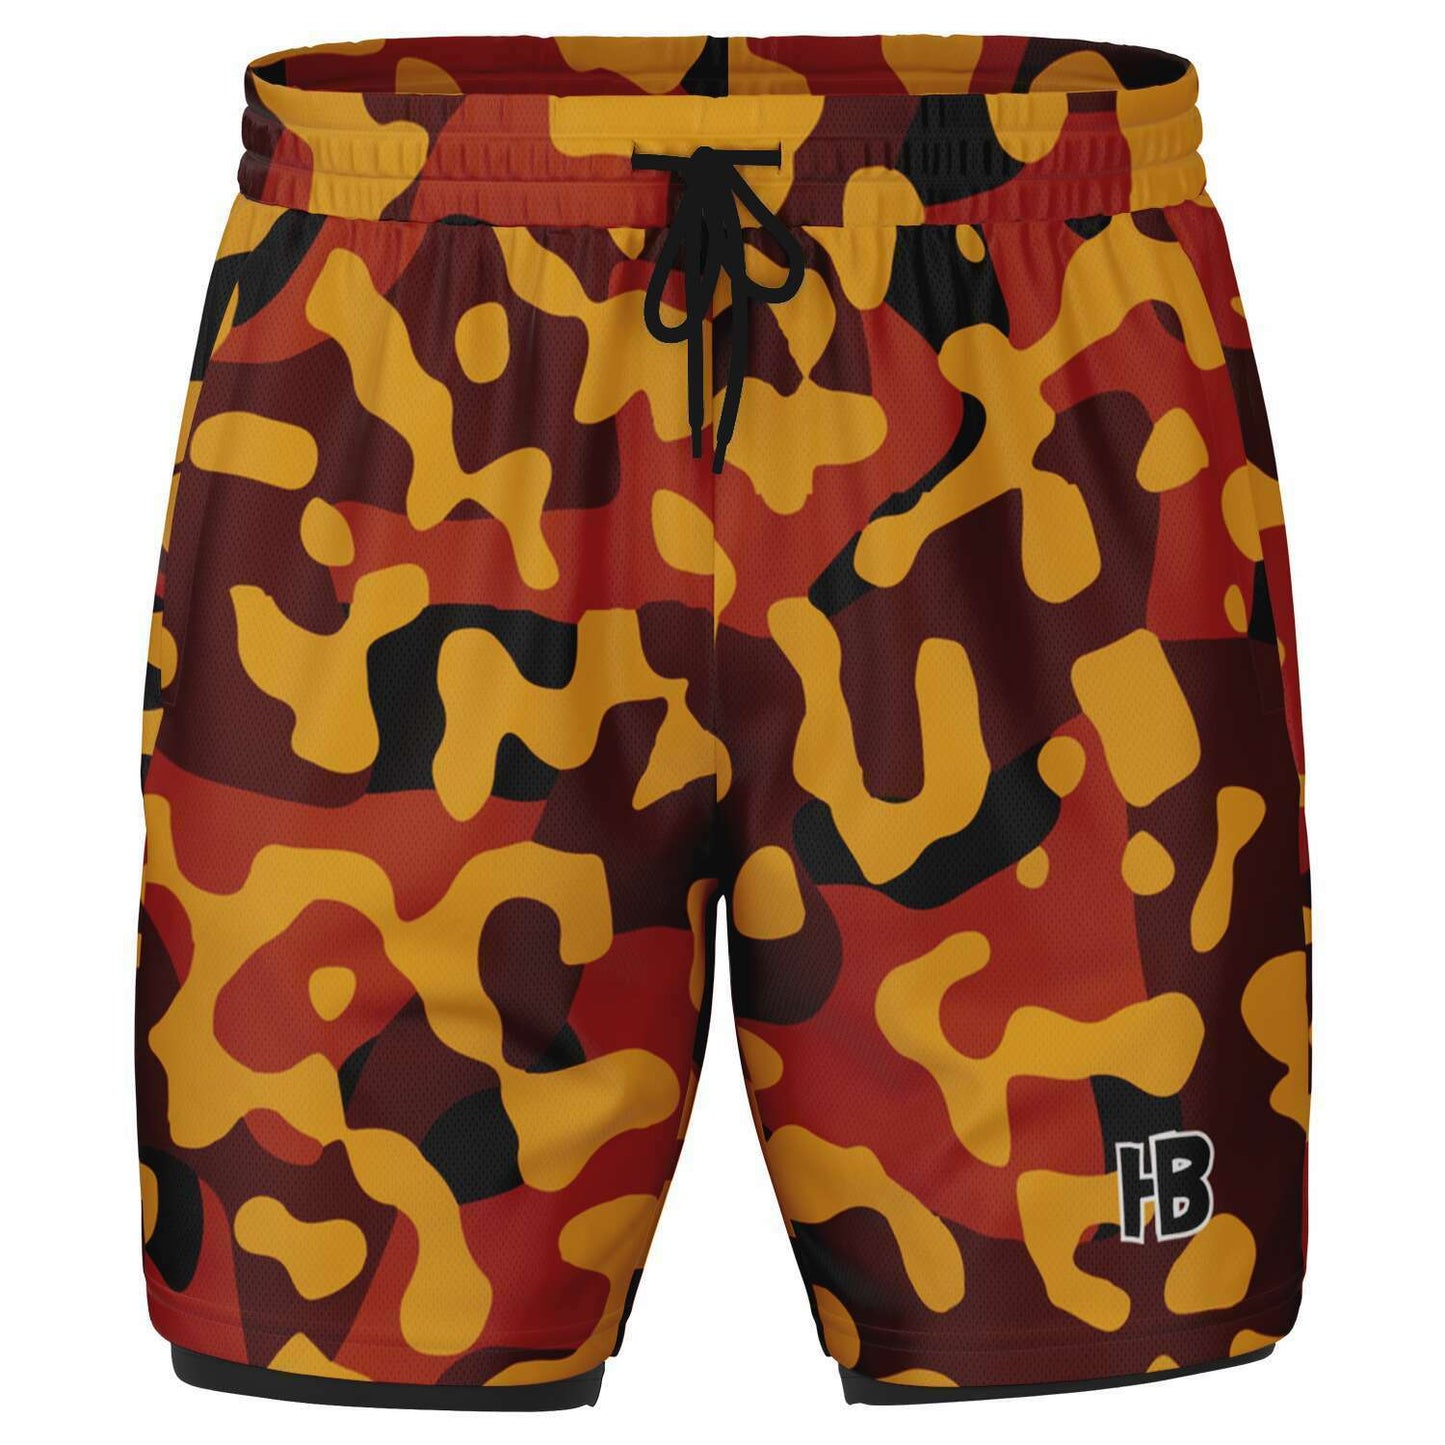 ReDy PoP WoMeN'S AnD mEnS cAmO 2 iN 1 sHoRts